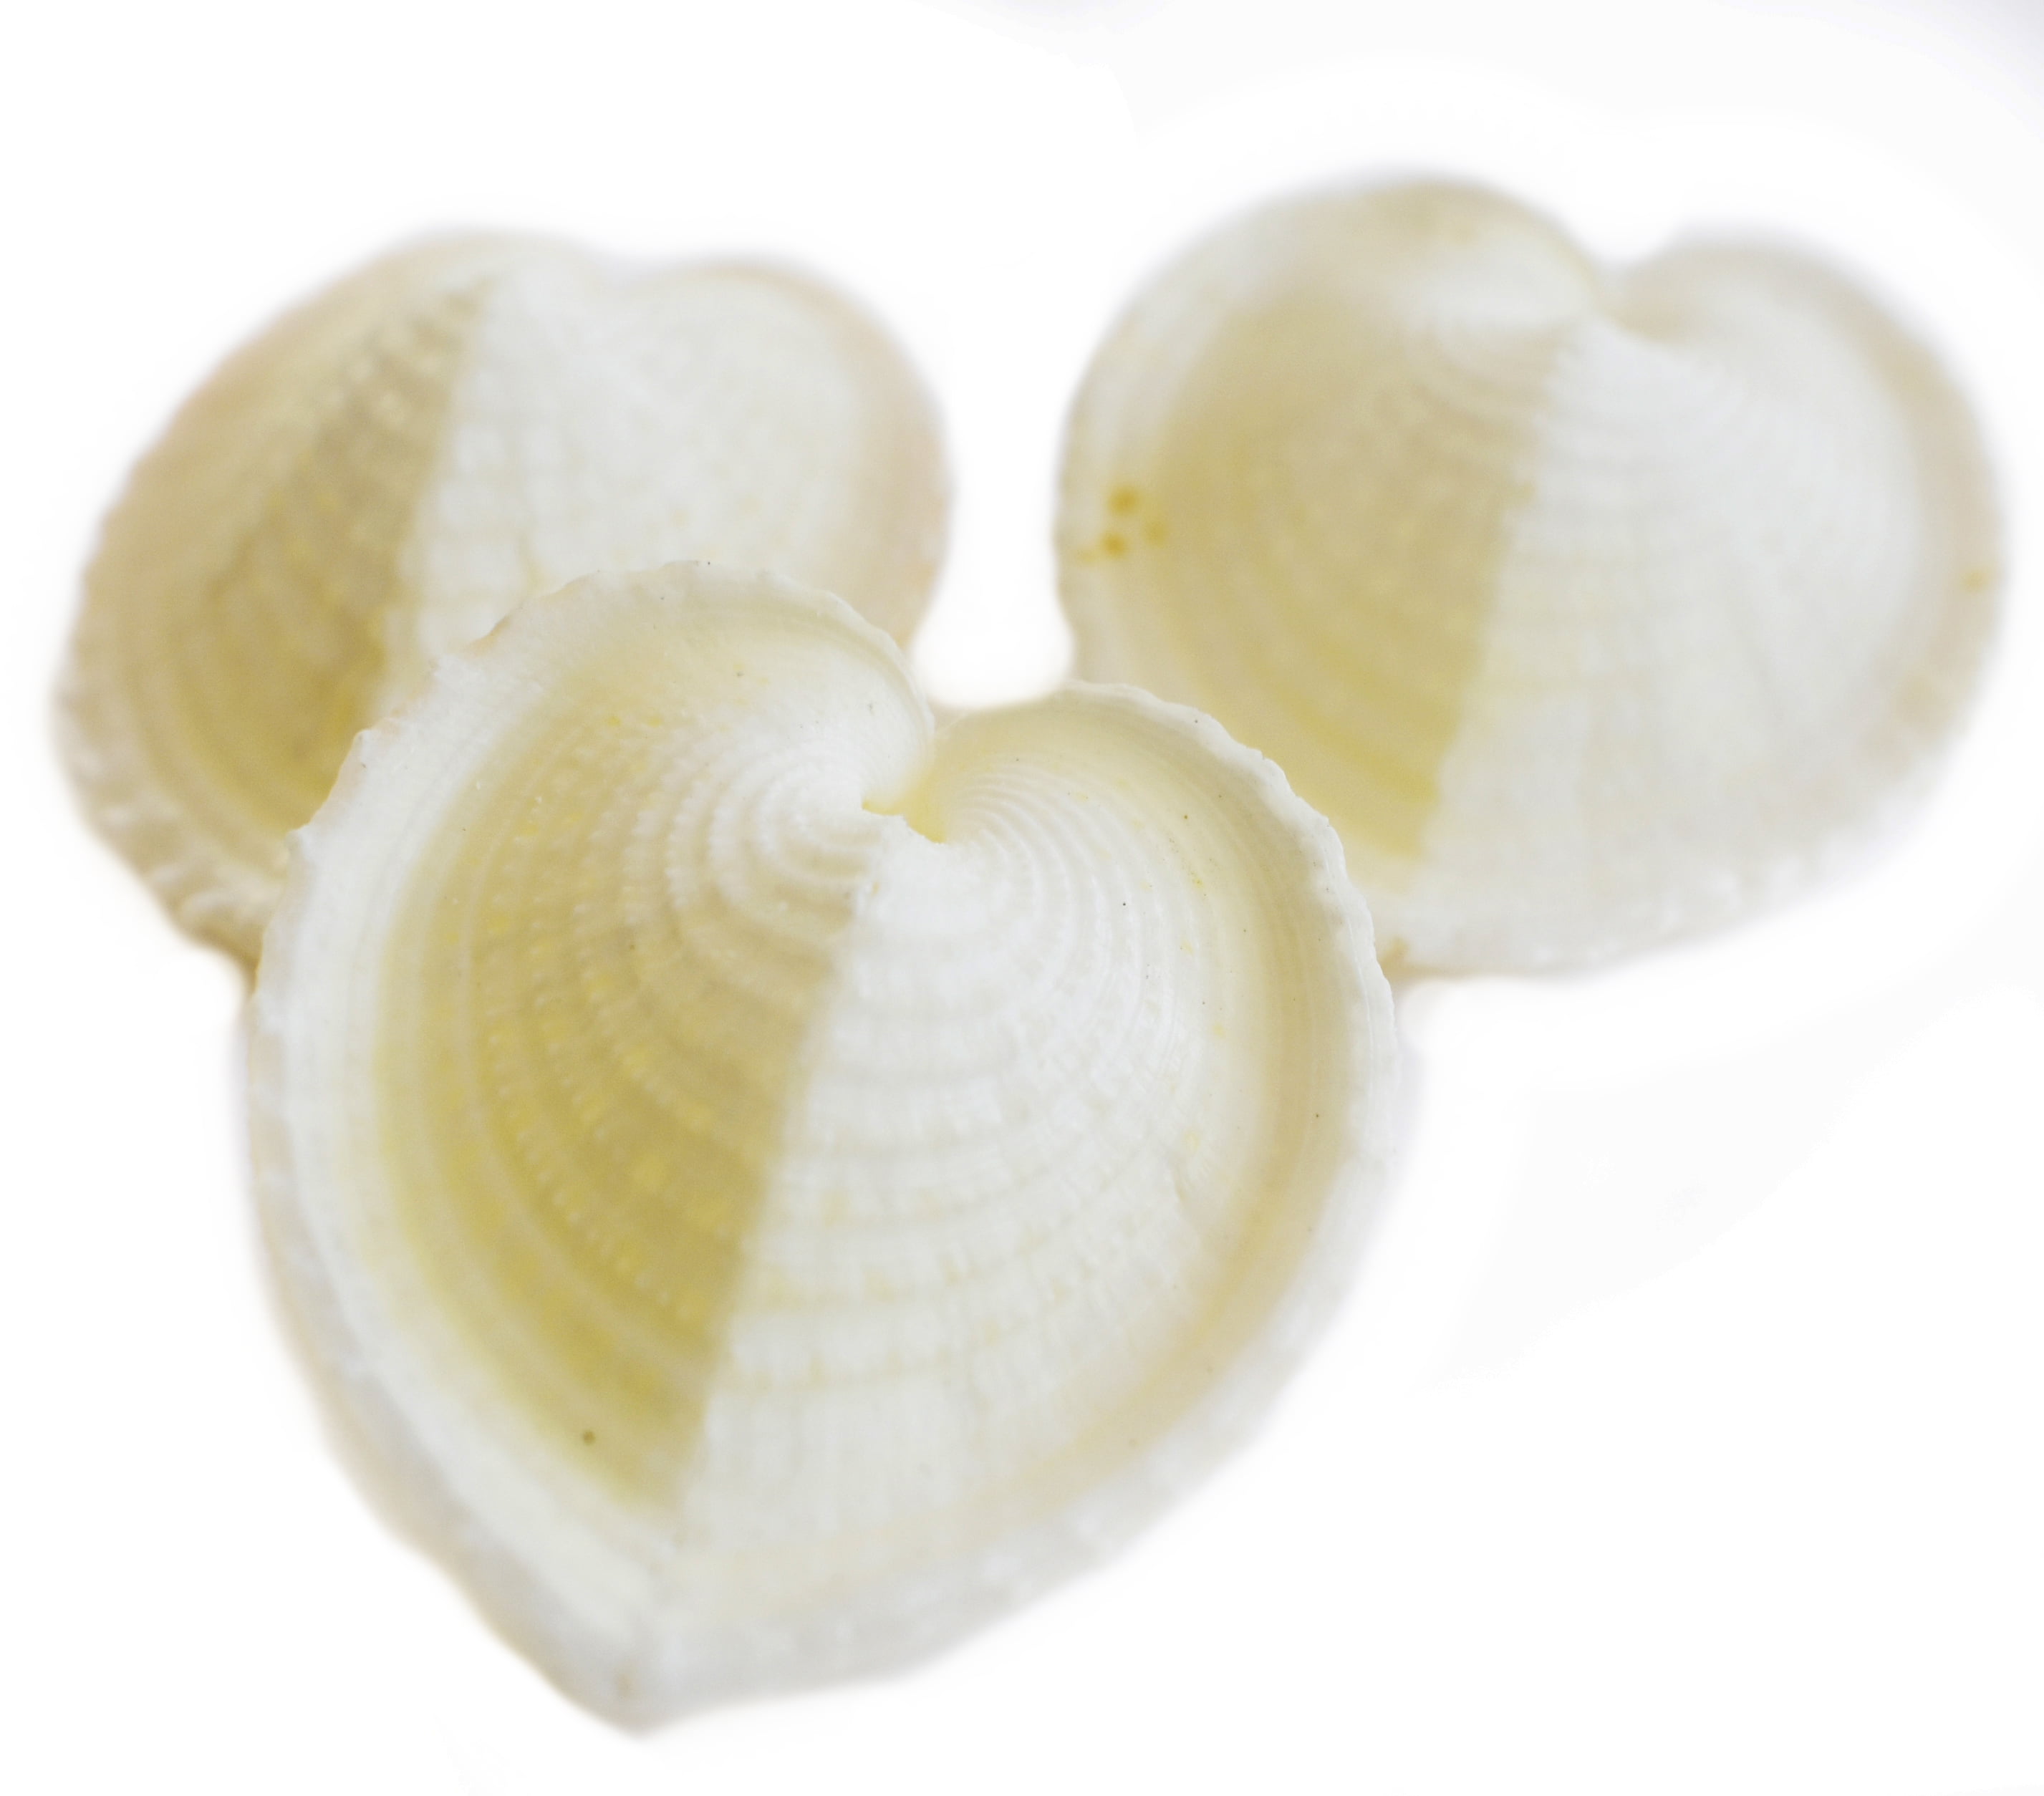 1/2 to 1-1/2 inches Tiny/Small Mixed Indian Seashells - 5.5 pounds @ $15.99  a bag; 3 @ 12.65 a bag